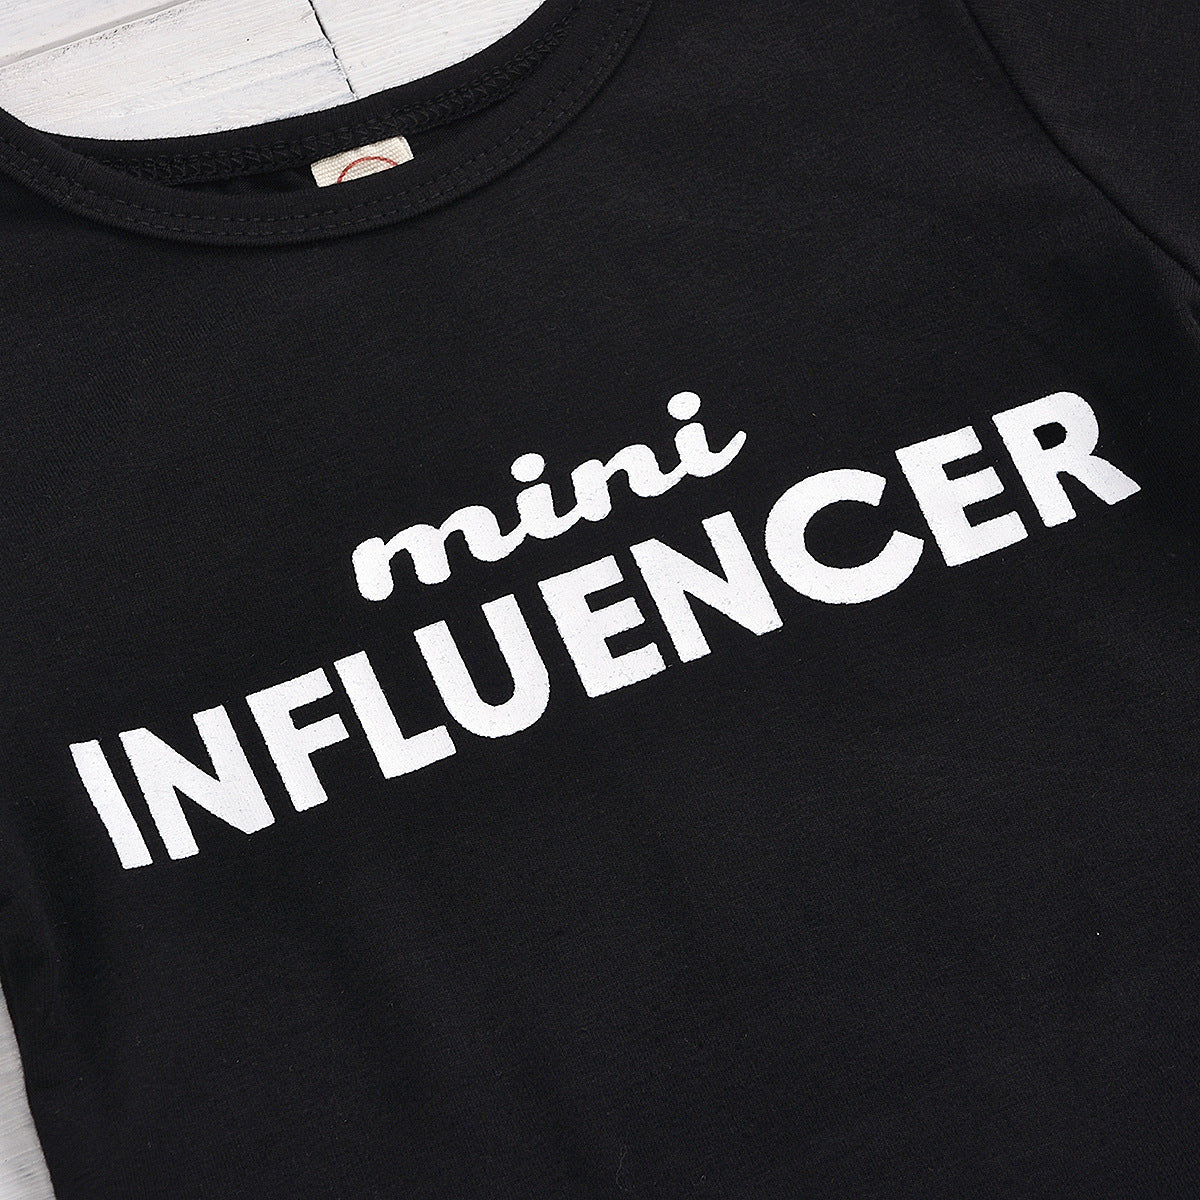 Girls' New Black "mini influencer" T-Shirt with distressed jeans and belt Set